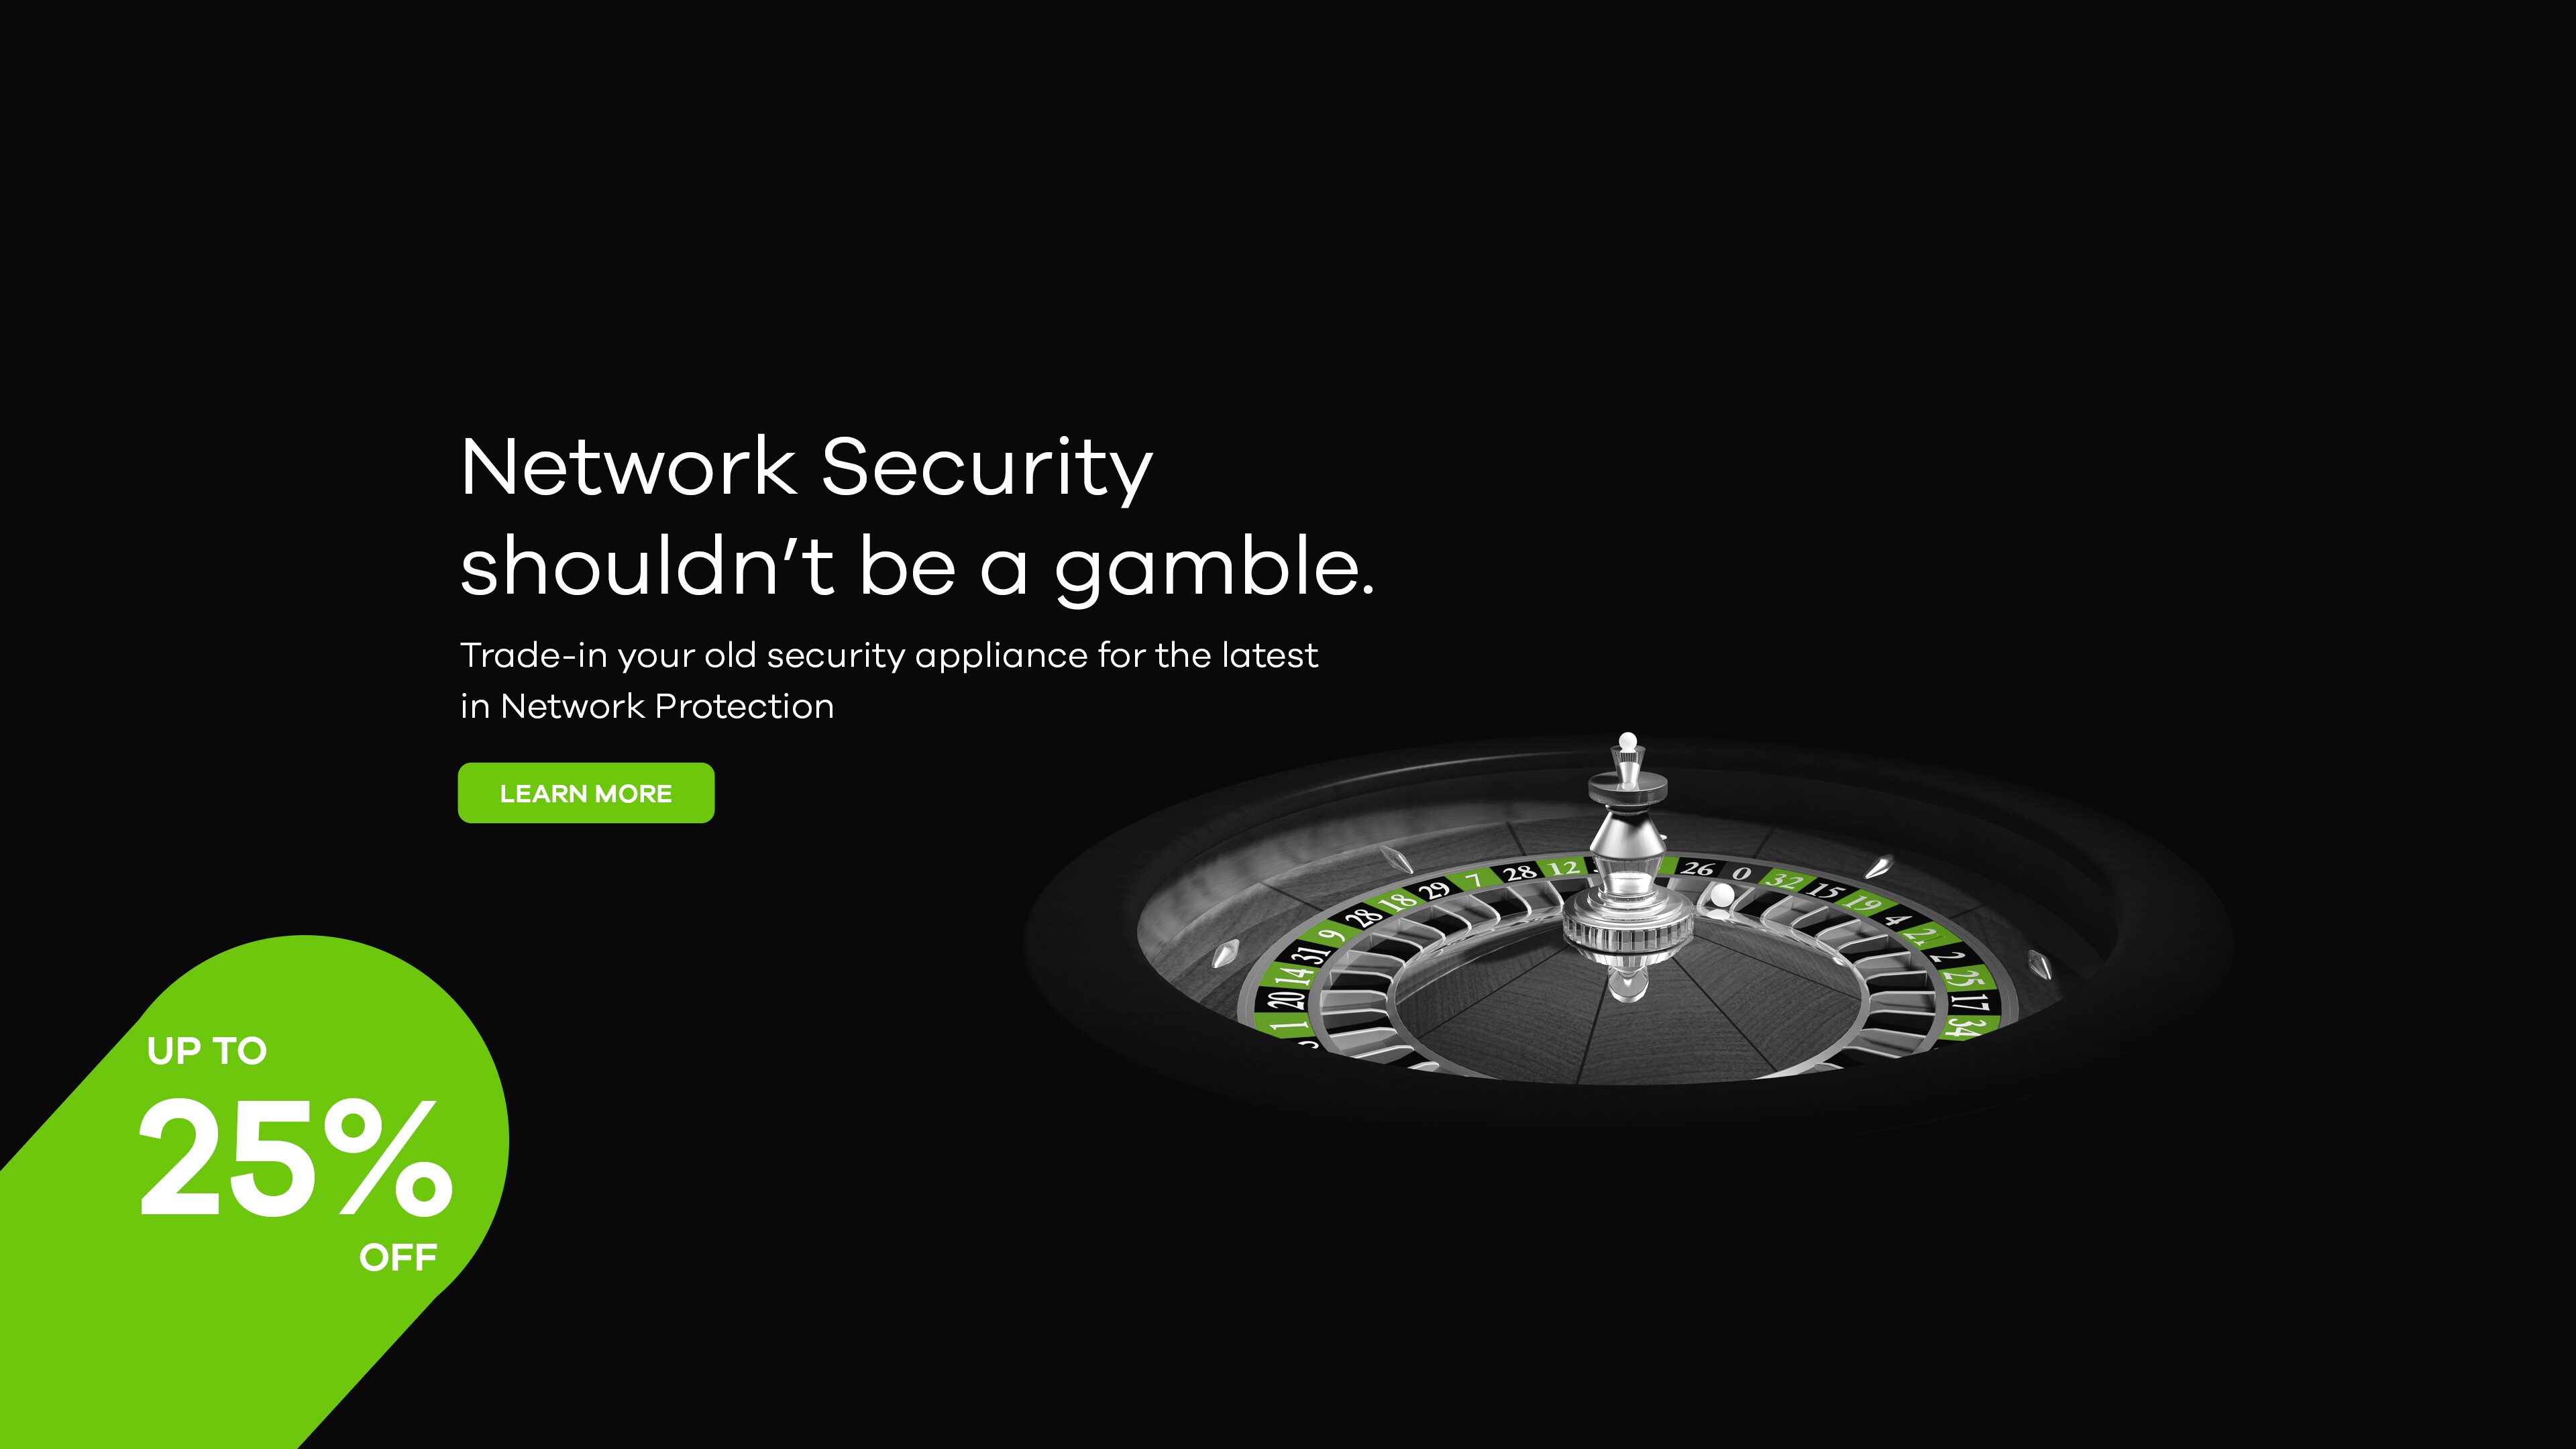 Zyxel Network Security